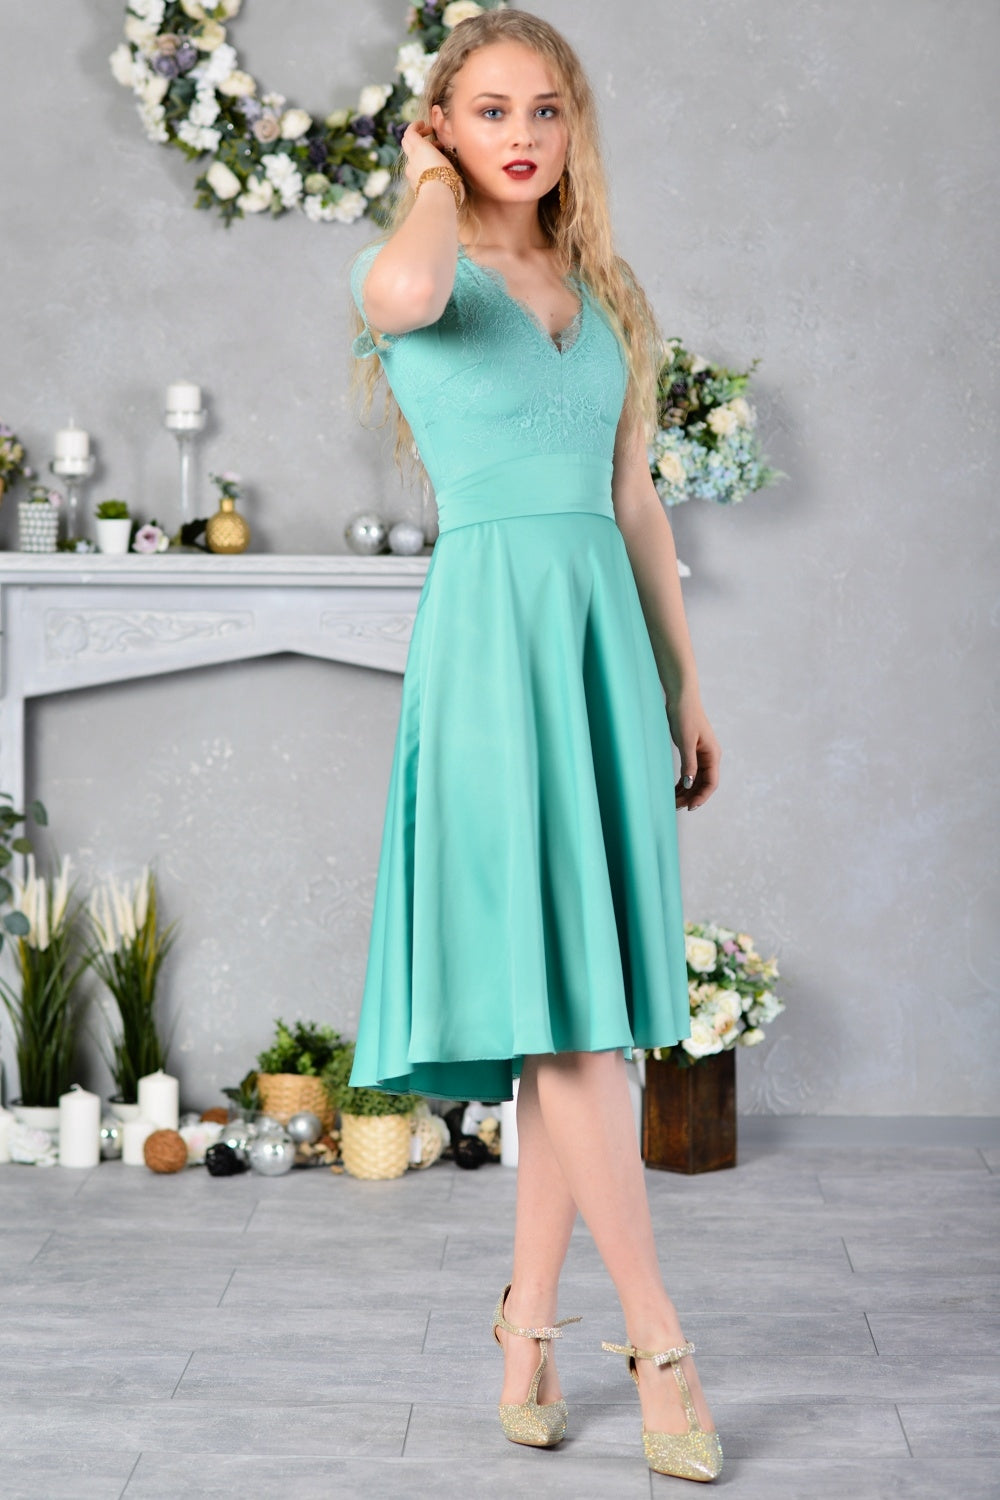 Mint green lace dress with circle skirt